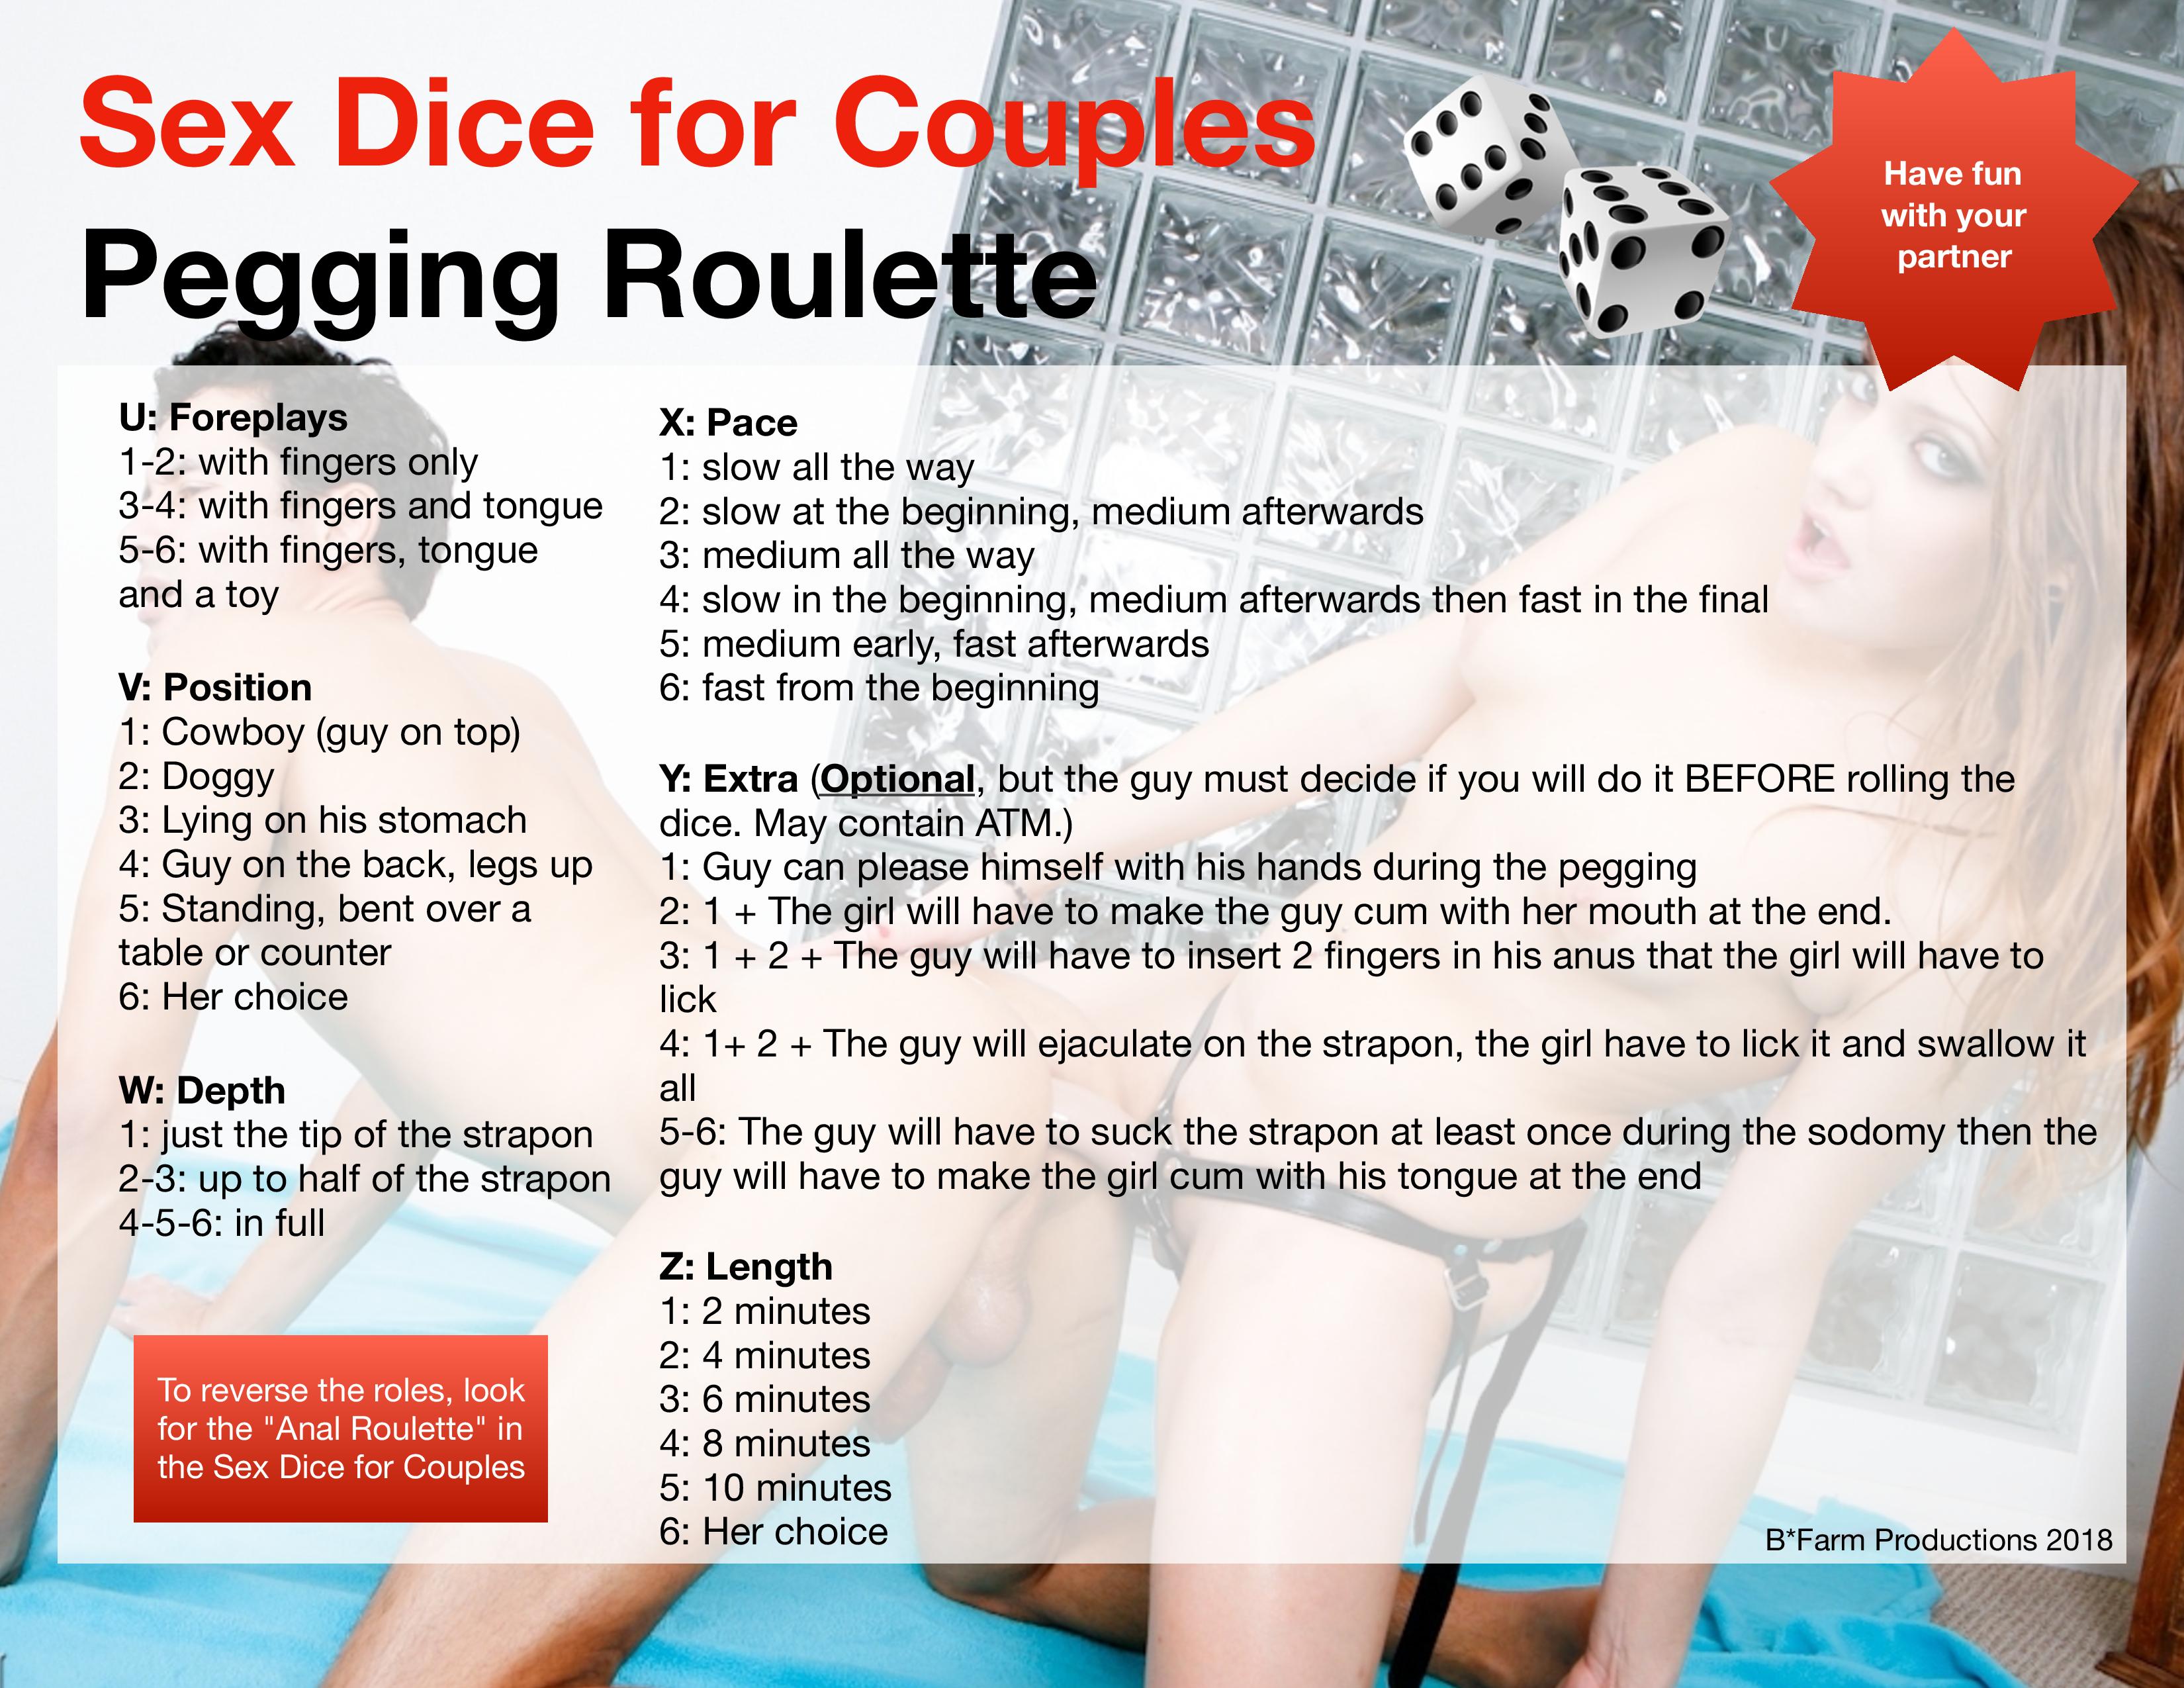 Sex Dice for Couples Pegging Roulette picture pic